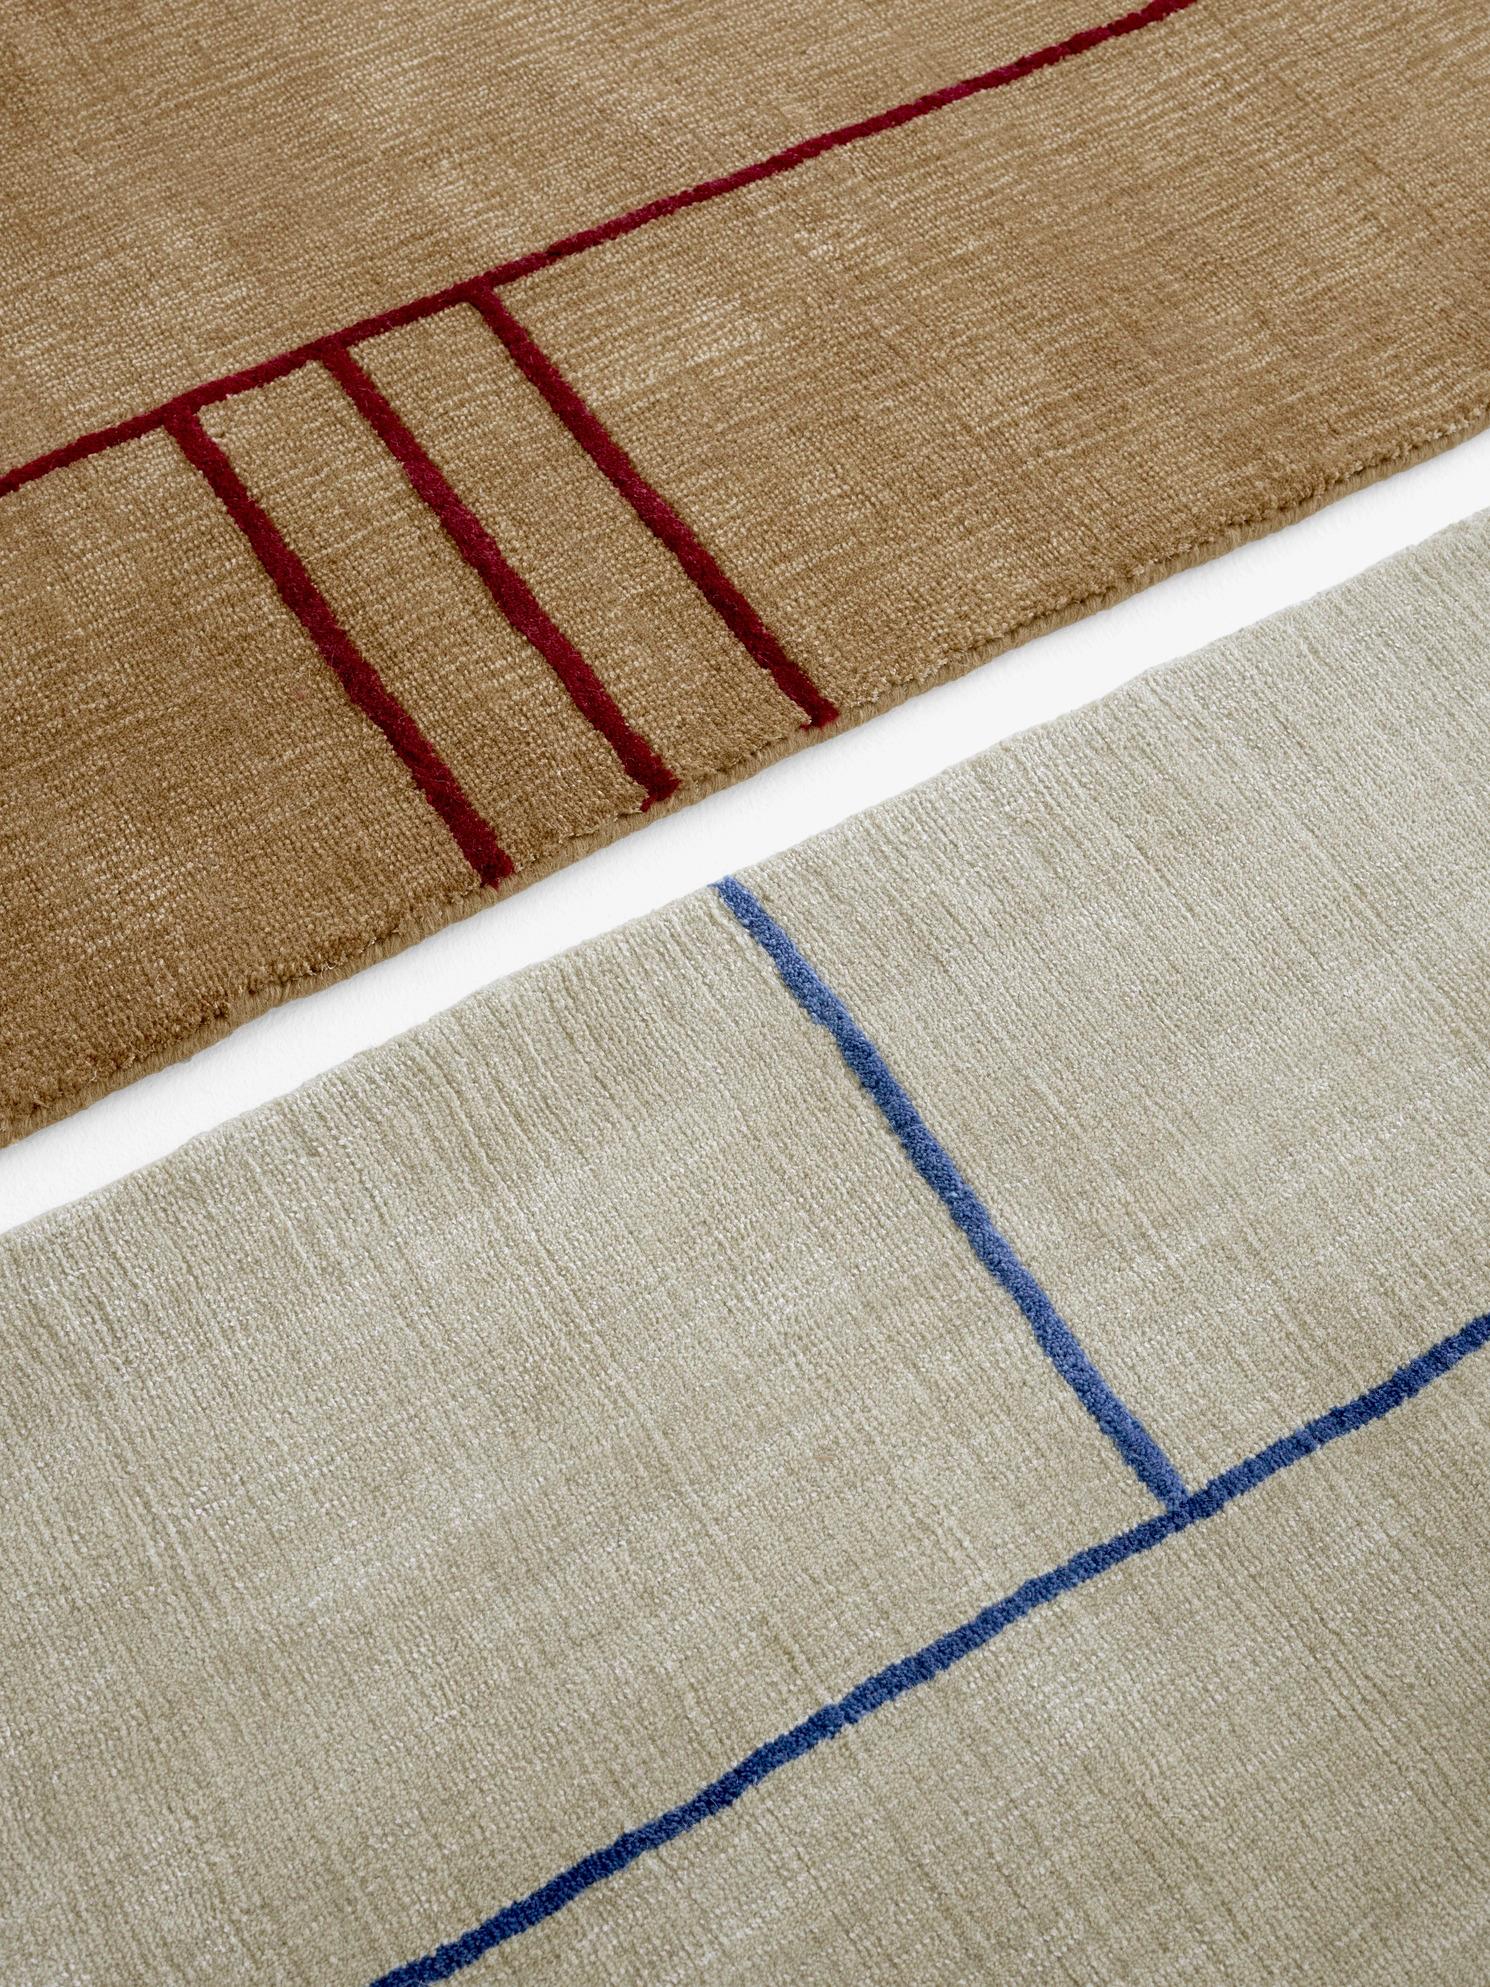 Contemporary Cruise AP12 Rug, Aden Desert Beige, Designed by All the Way to Paris for &T For Sale